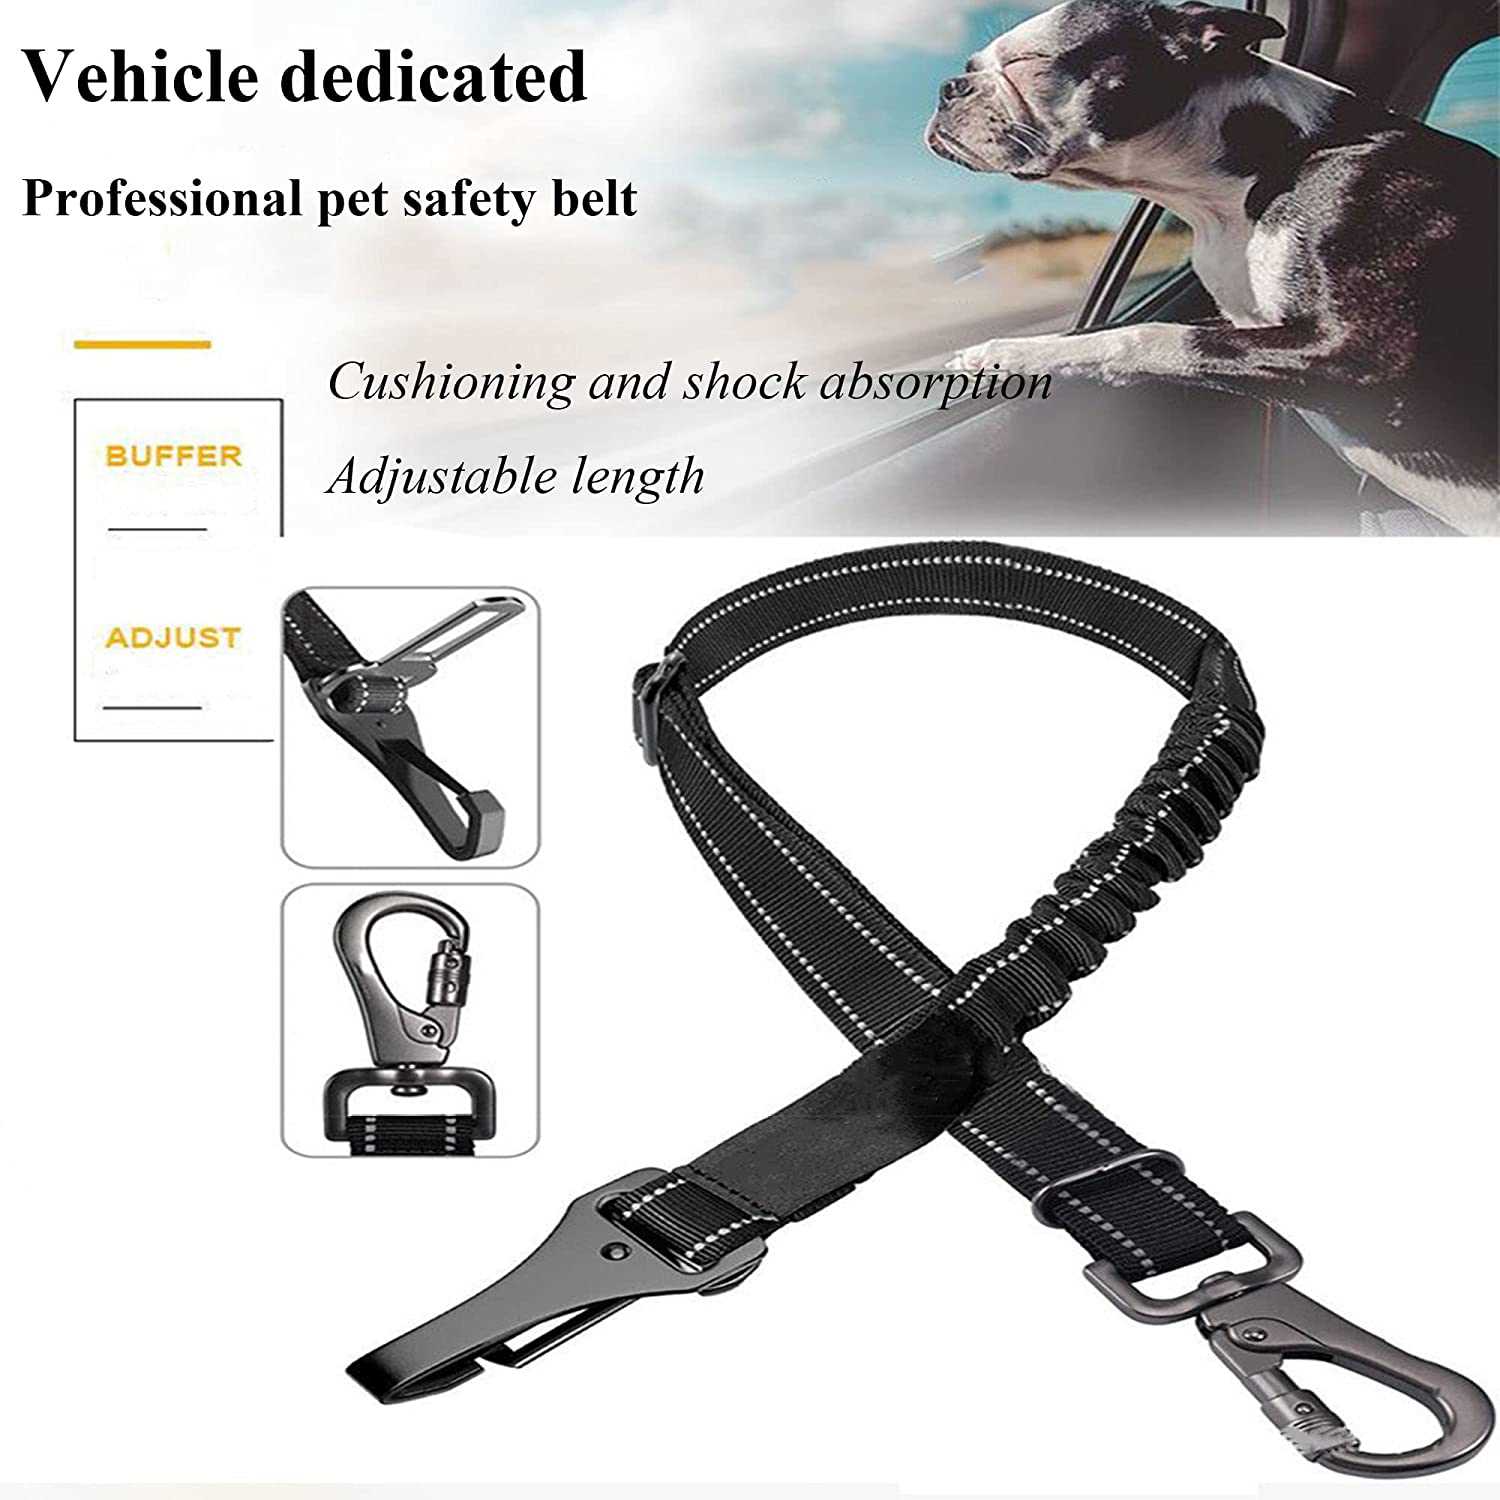 Dog Seat Belt Car safety Harness Restraint Durable with Anti Shock Bungee Buffer Isofix Latch for Dogs Car Travel Heavy Duty Dogs Travel Accessories 